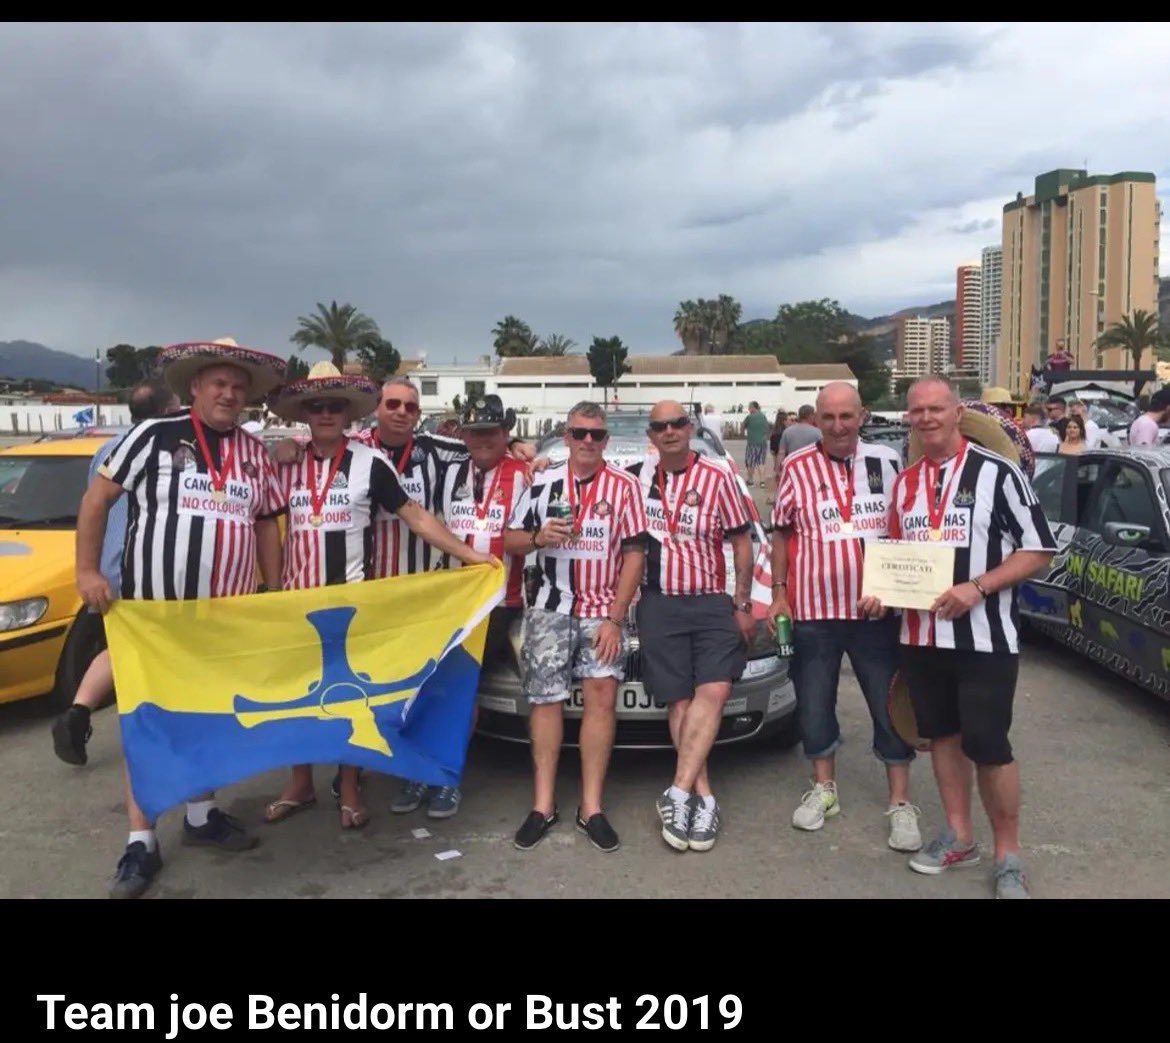 Orange John born out of trying to raise a couple of hundred £s for childrens cancer,not everything has been mountain based,Joes dad & pals did #benidormorbust decking 2 bangers in 🔴⚪️⚫️⚪️ #safc #nufc ,TeamJoe goes again in November as we head to the #sahara for @dragonflytweets